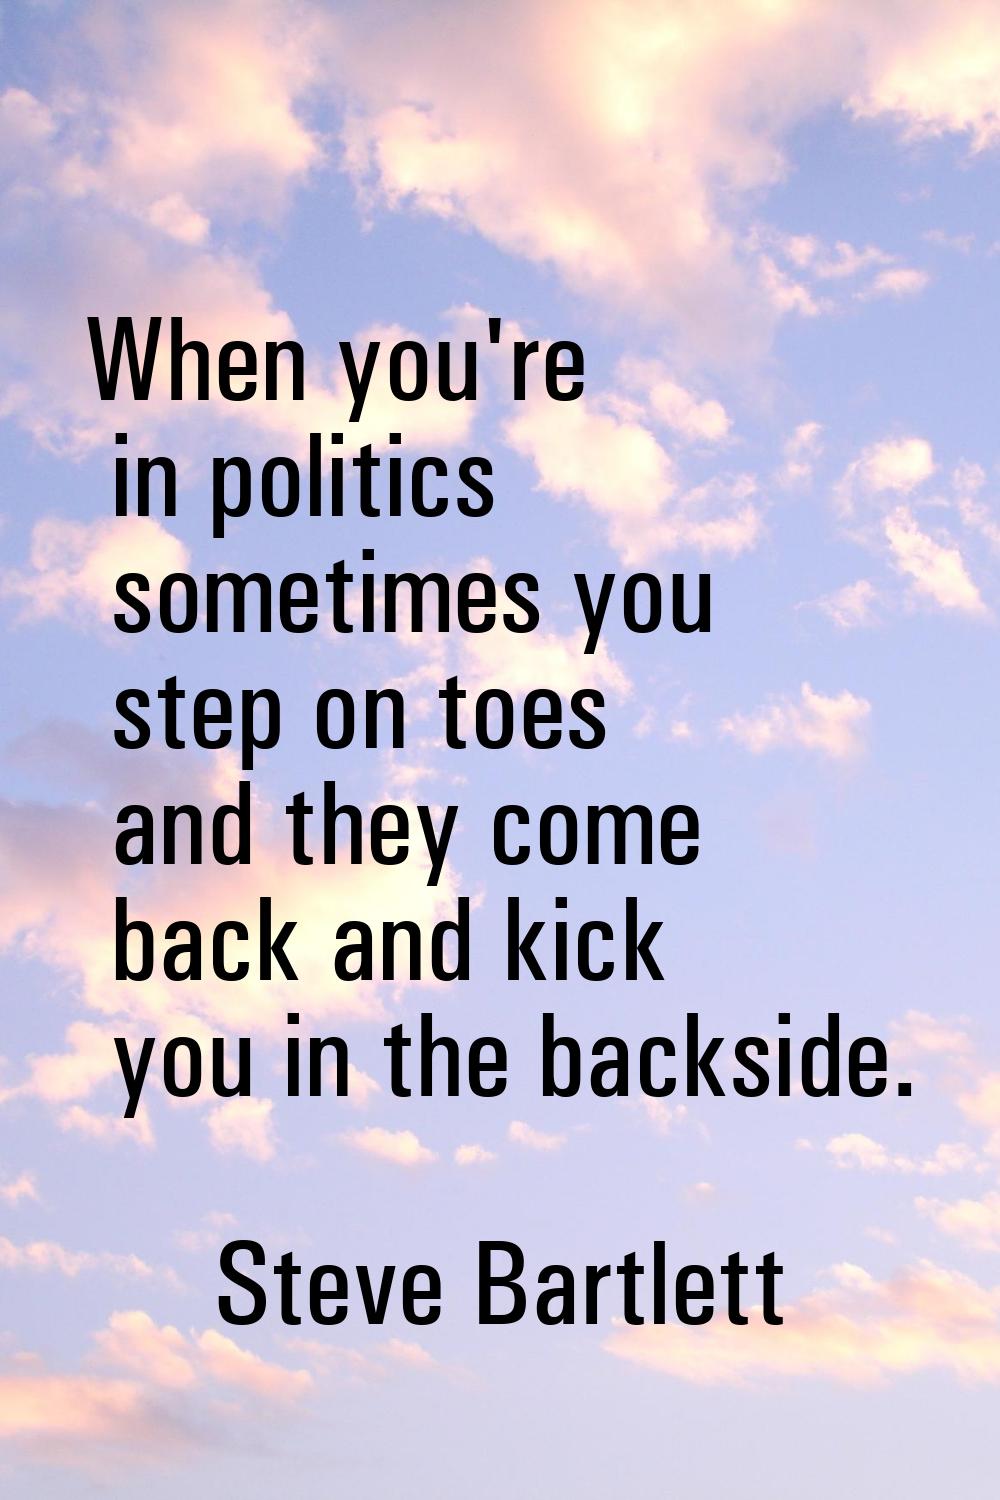 When you're in politics sometimes you step on toes and they come back and kick you in the backside.